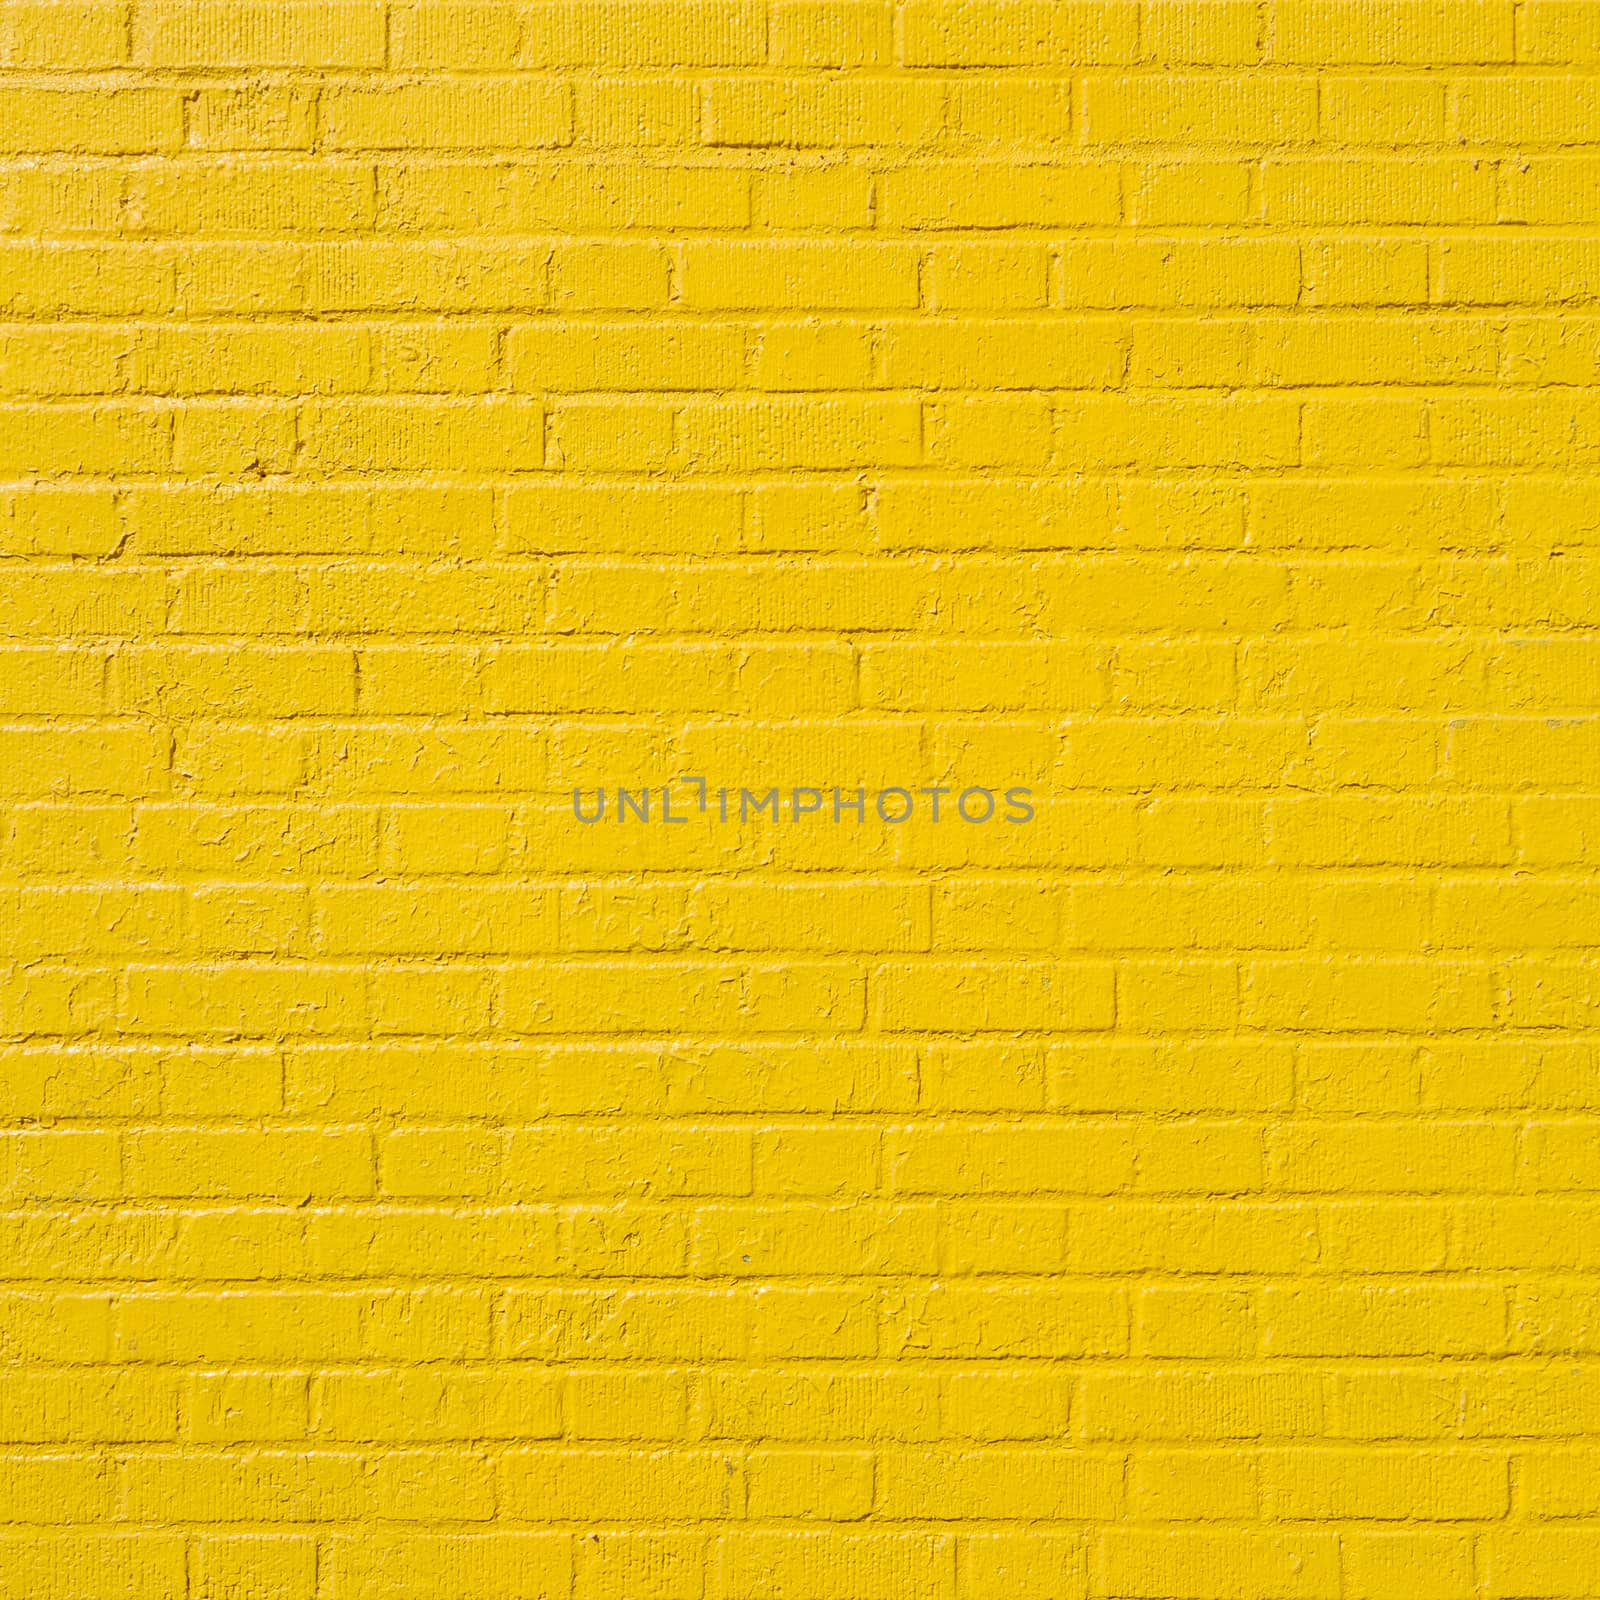 square part of yellow painted brick wall by ahavelaar